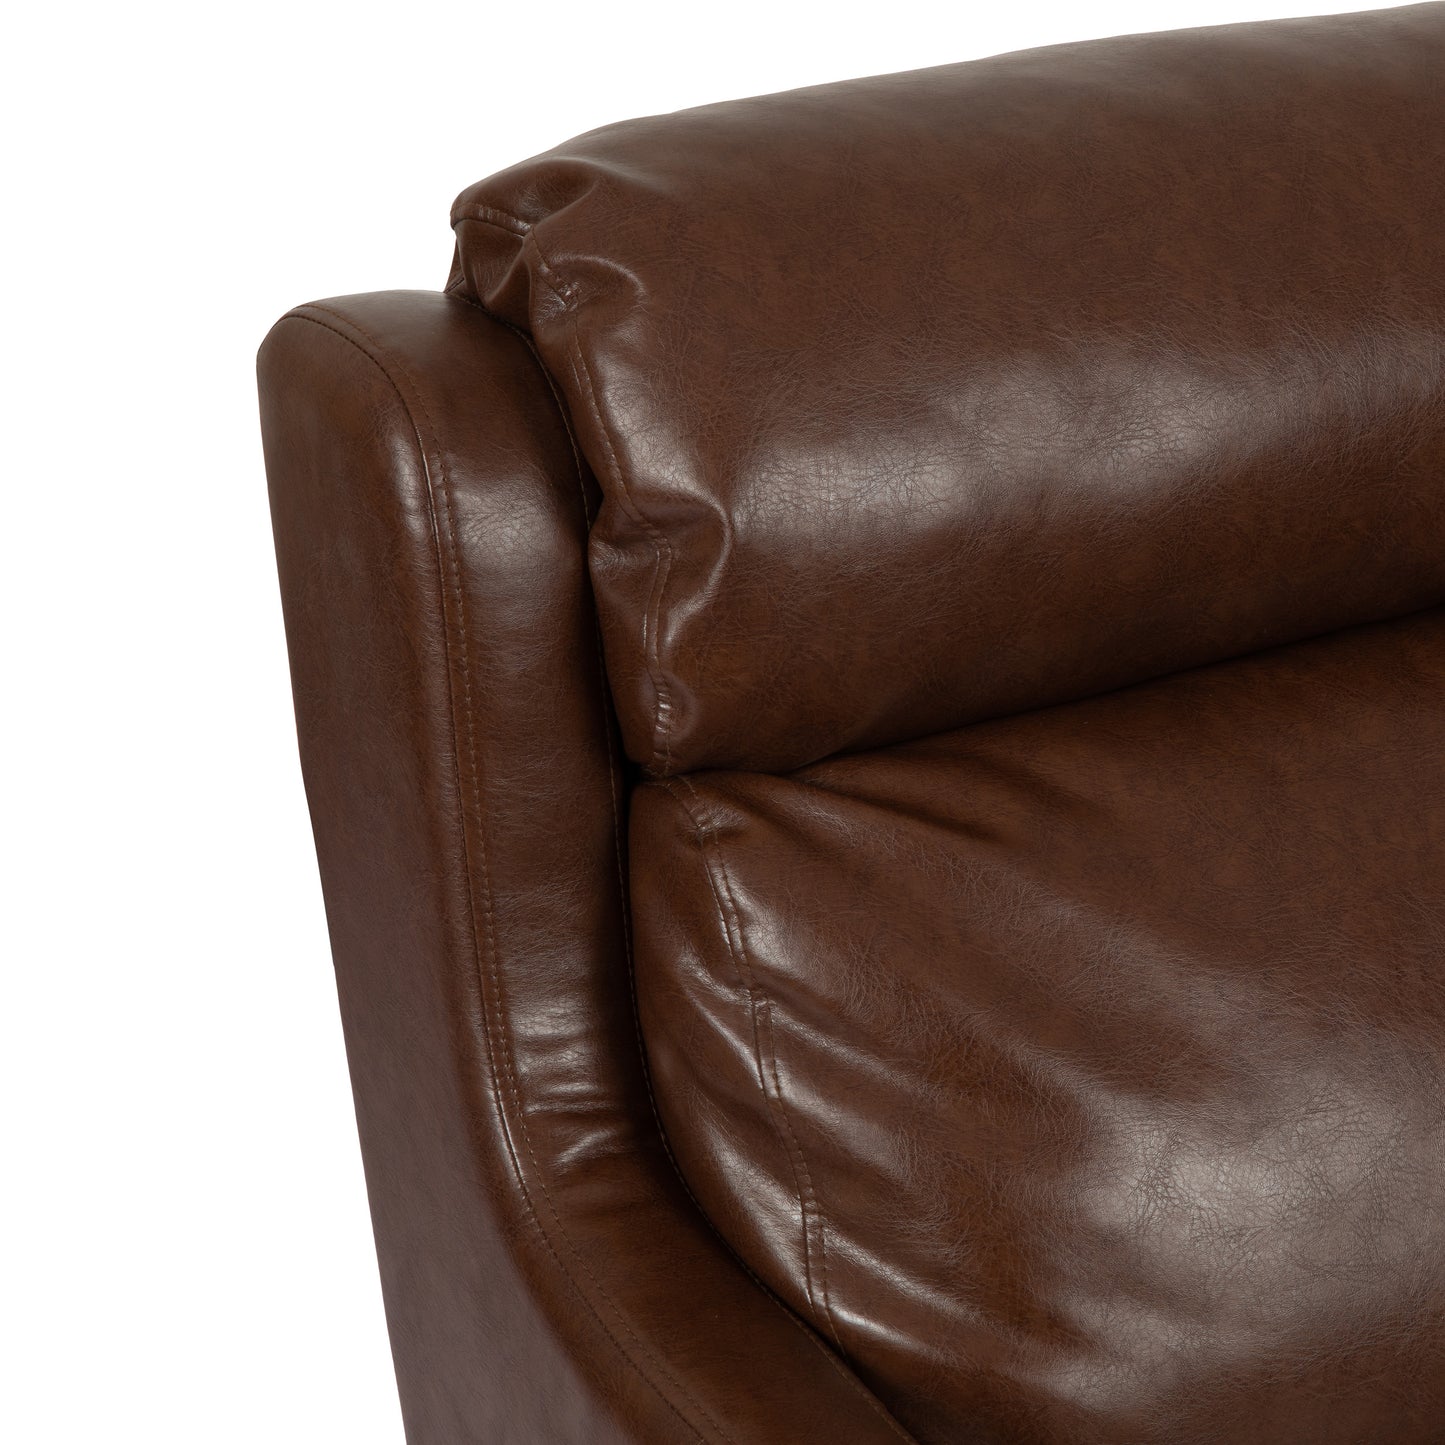 Baden Contemporary Pillow Tufted Faux Leather Club Chair